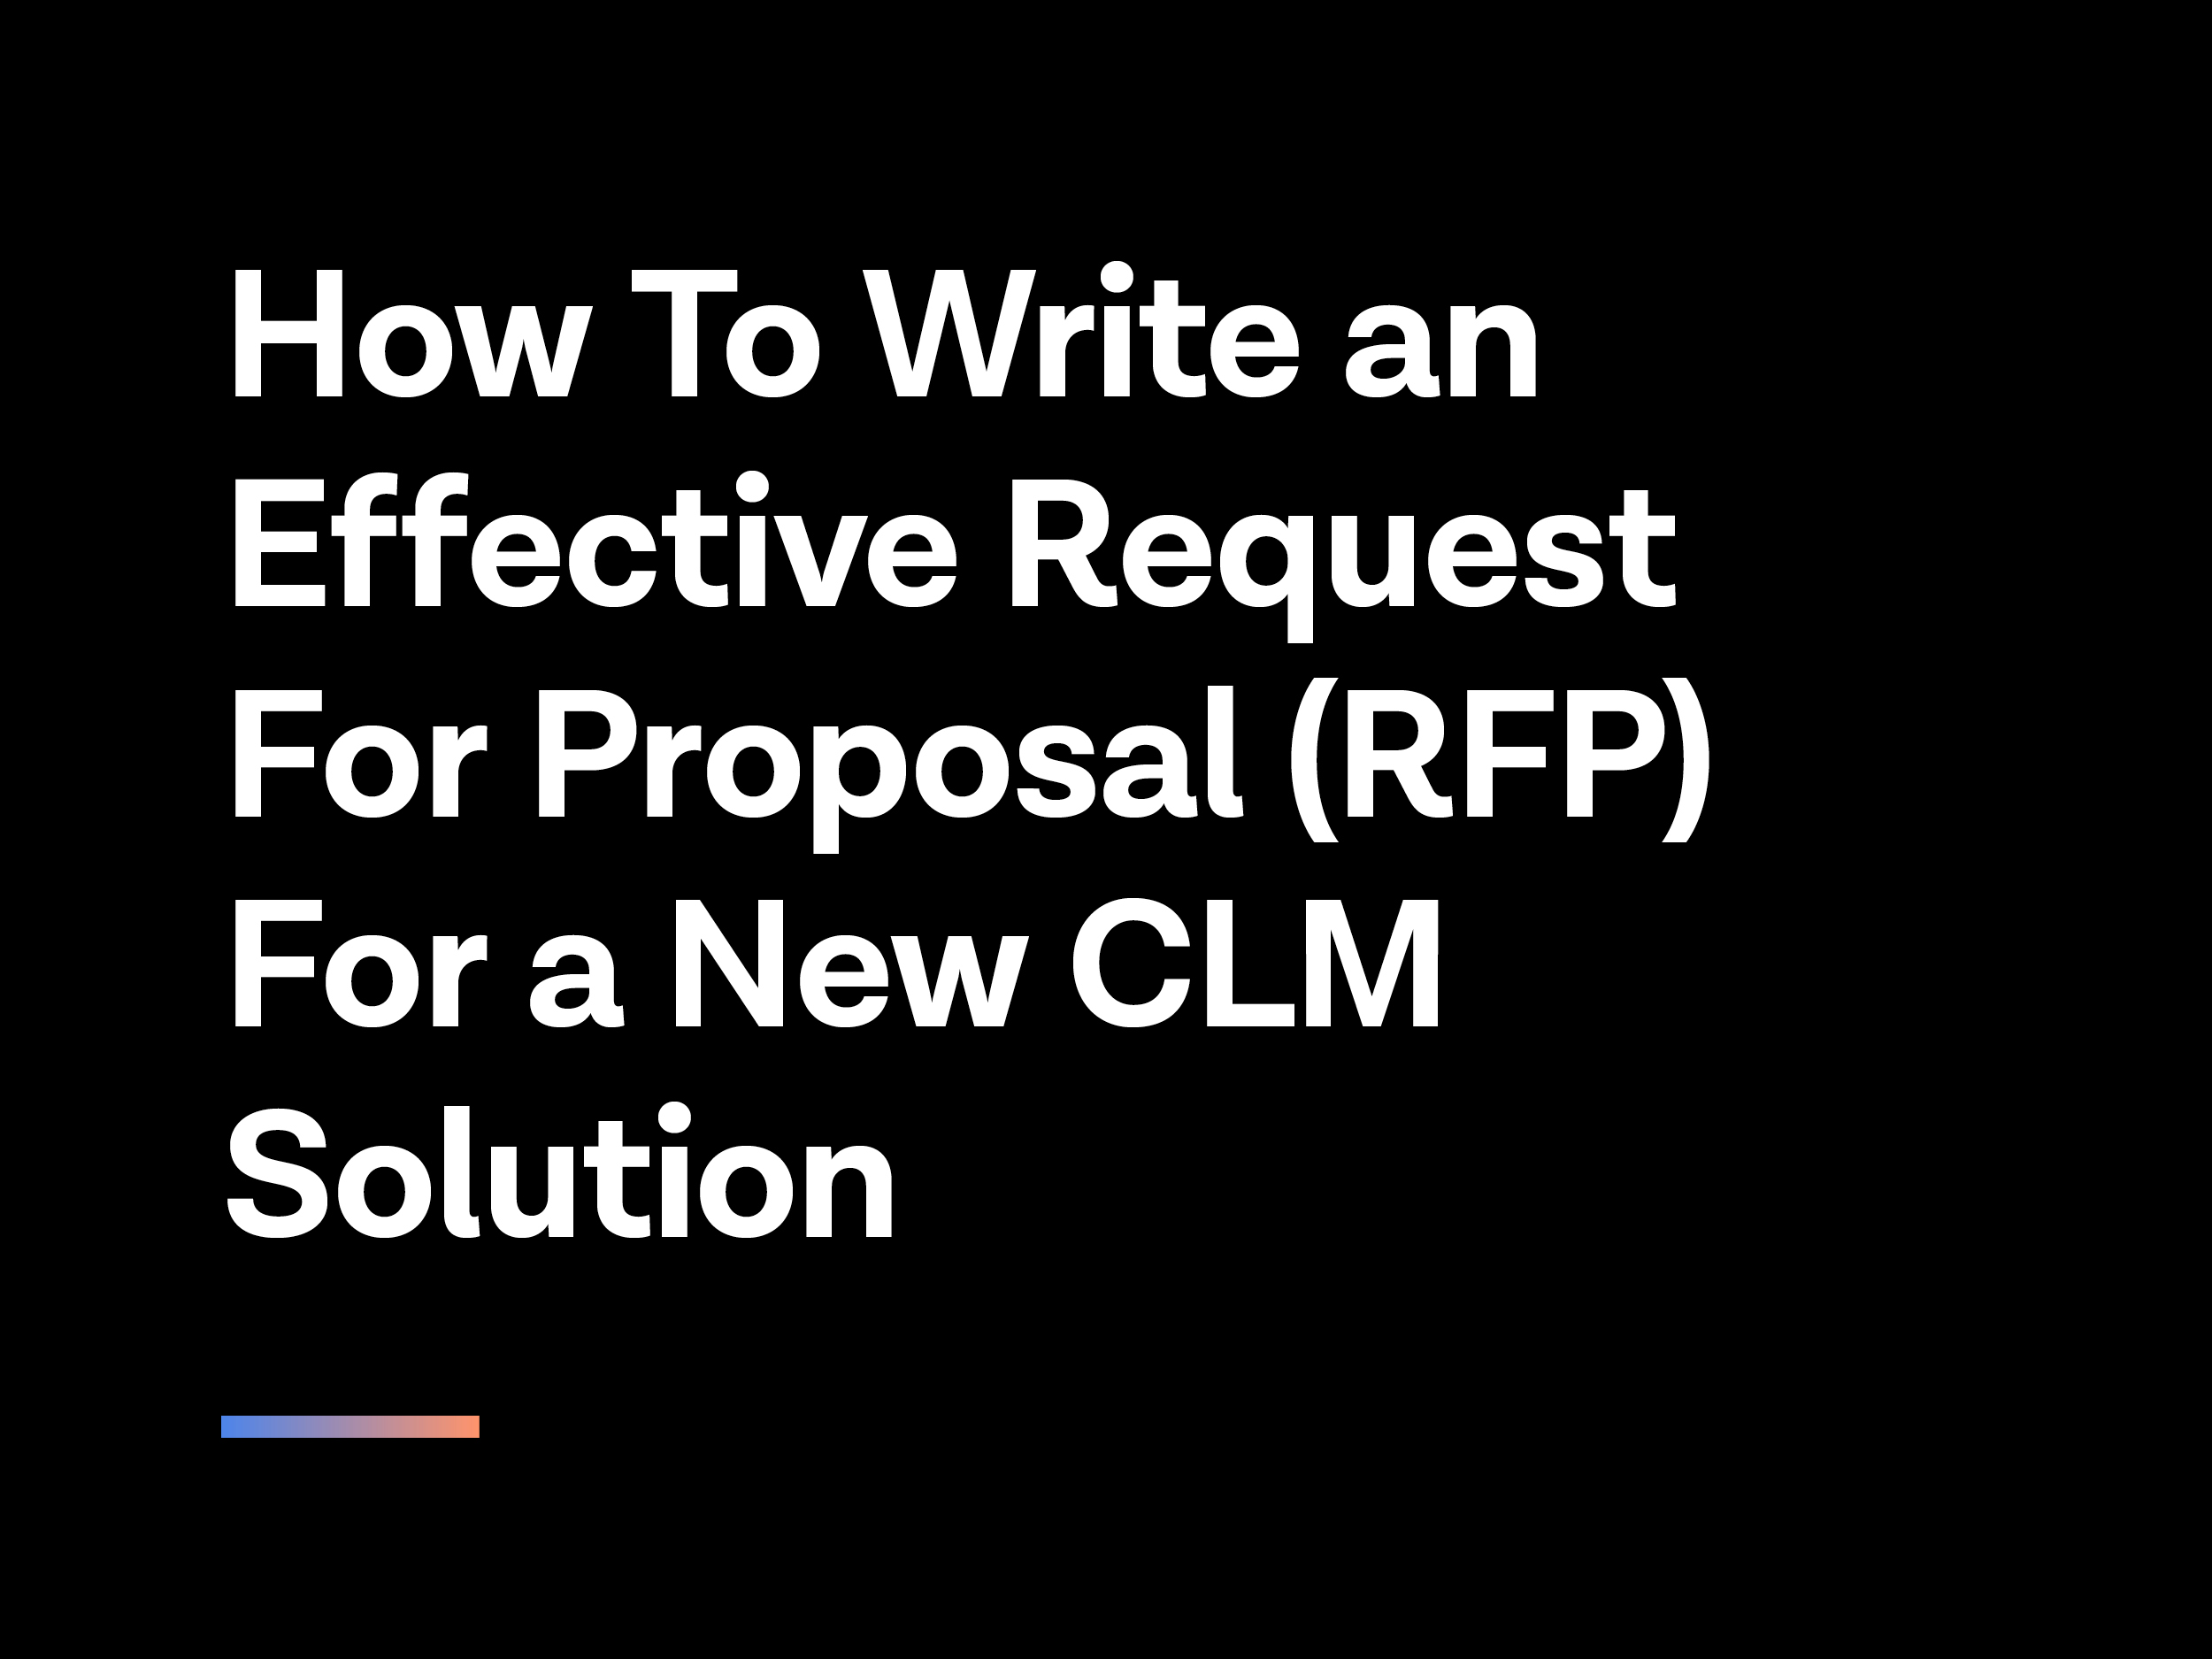 c365-ebook-how-to-write-an-effective-clm-rfp